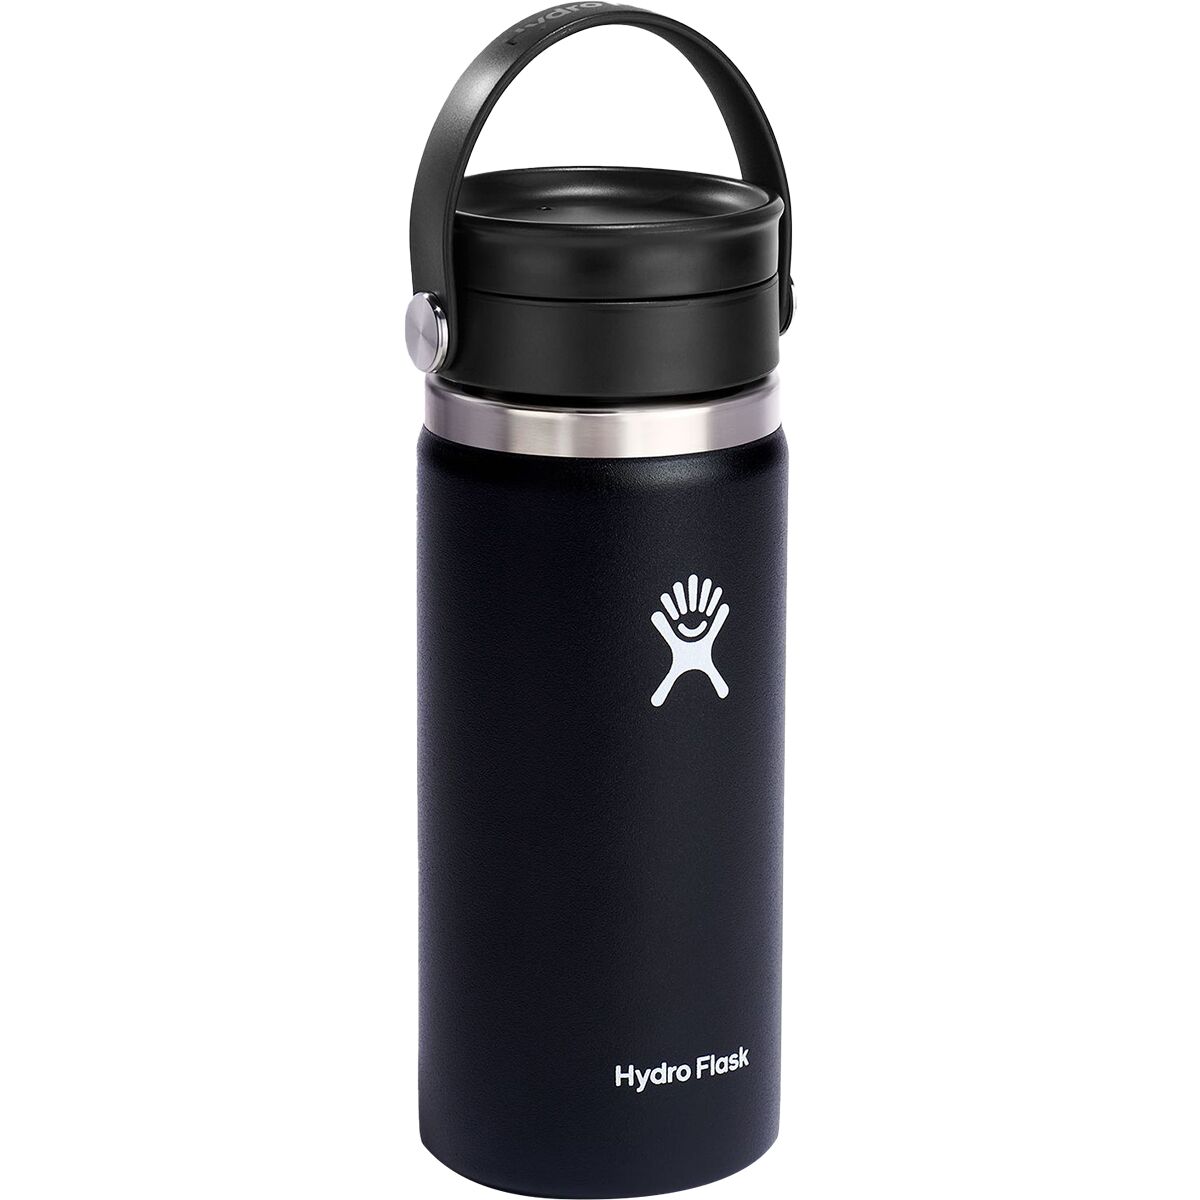  Hydro Flask Steel 12 oz. Mug with Insulated Press-In Lid : Home  & Kitchen